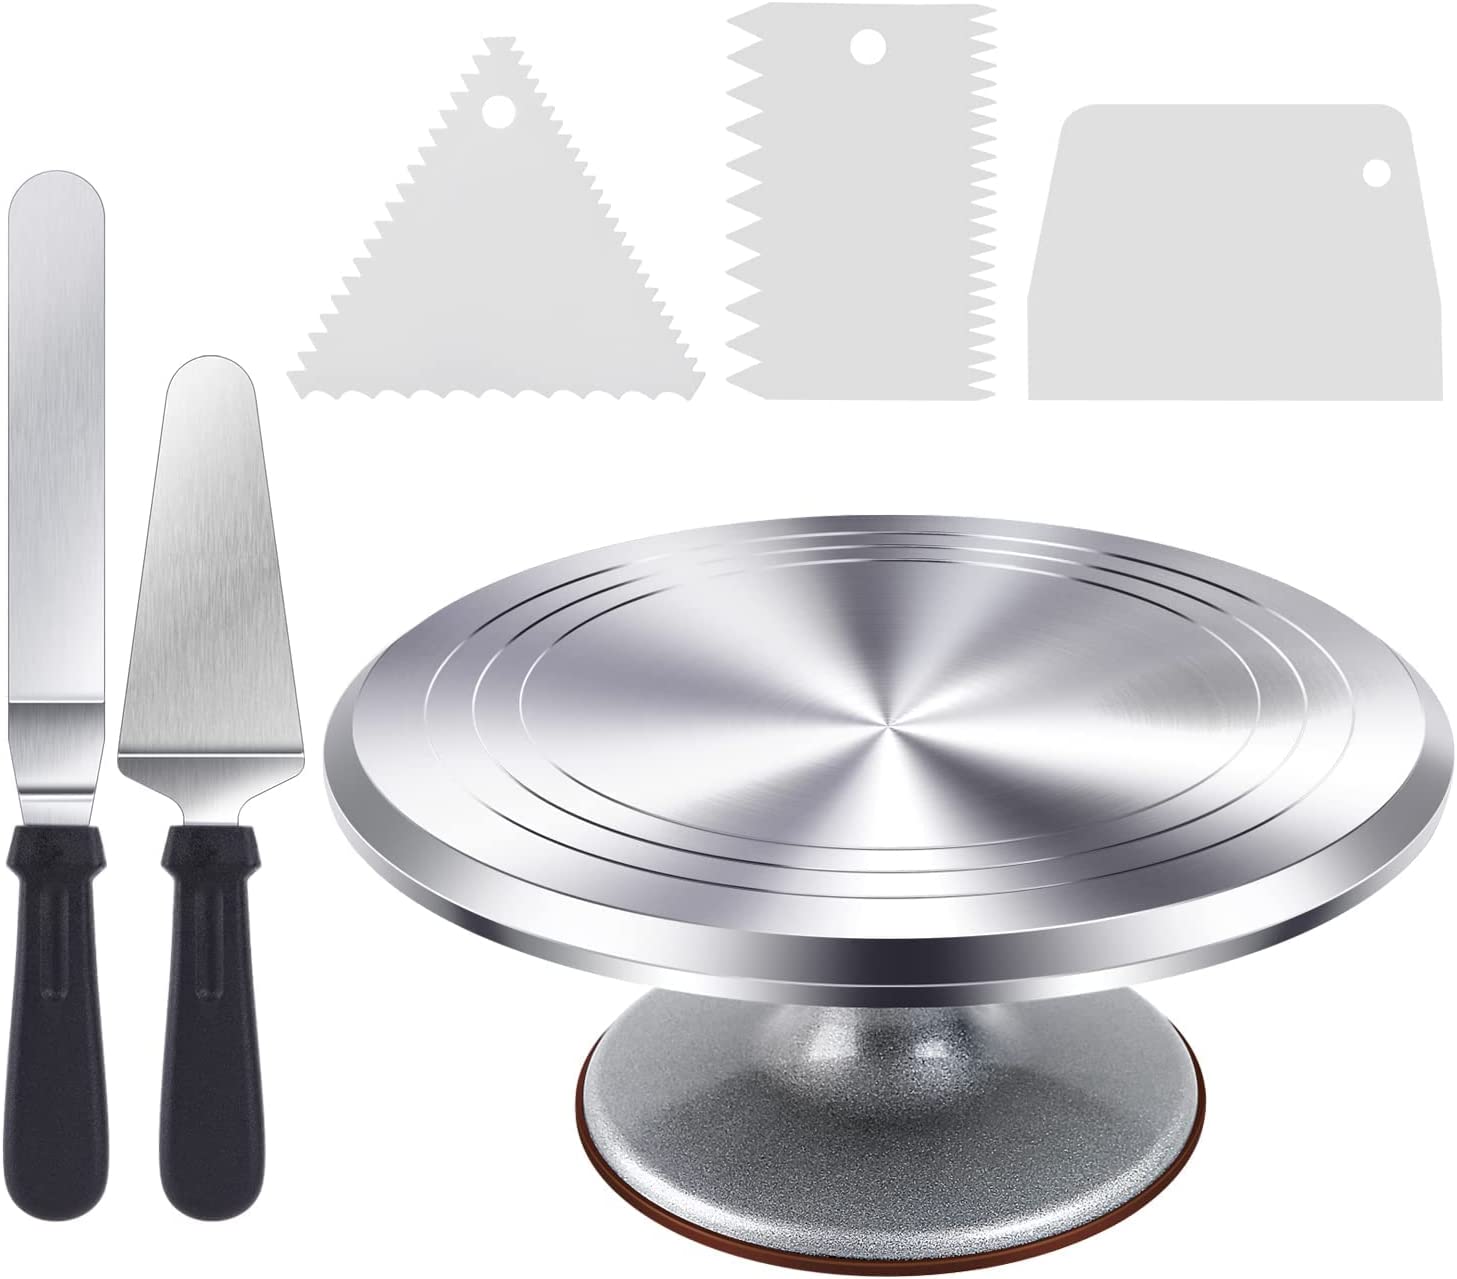 Ohuhu Stainless Steel Turntable Cake Decorating Stand